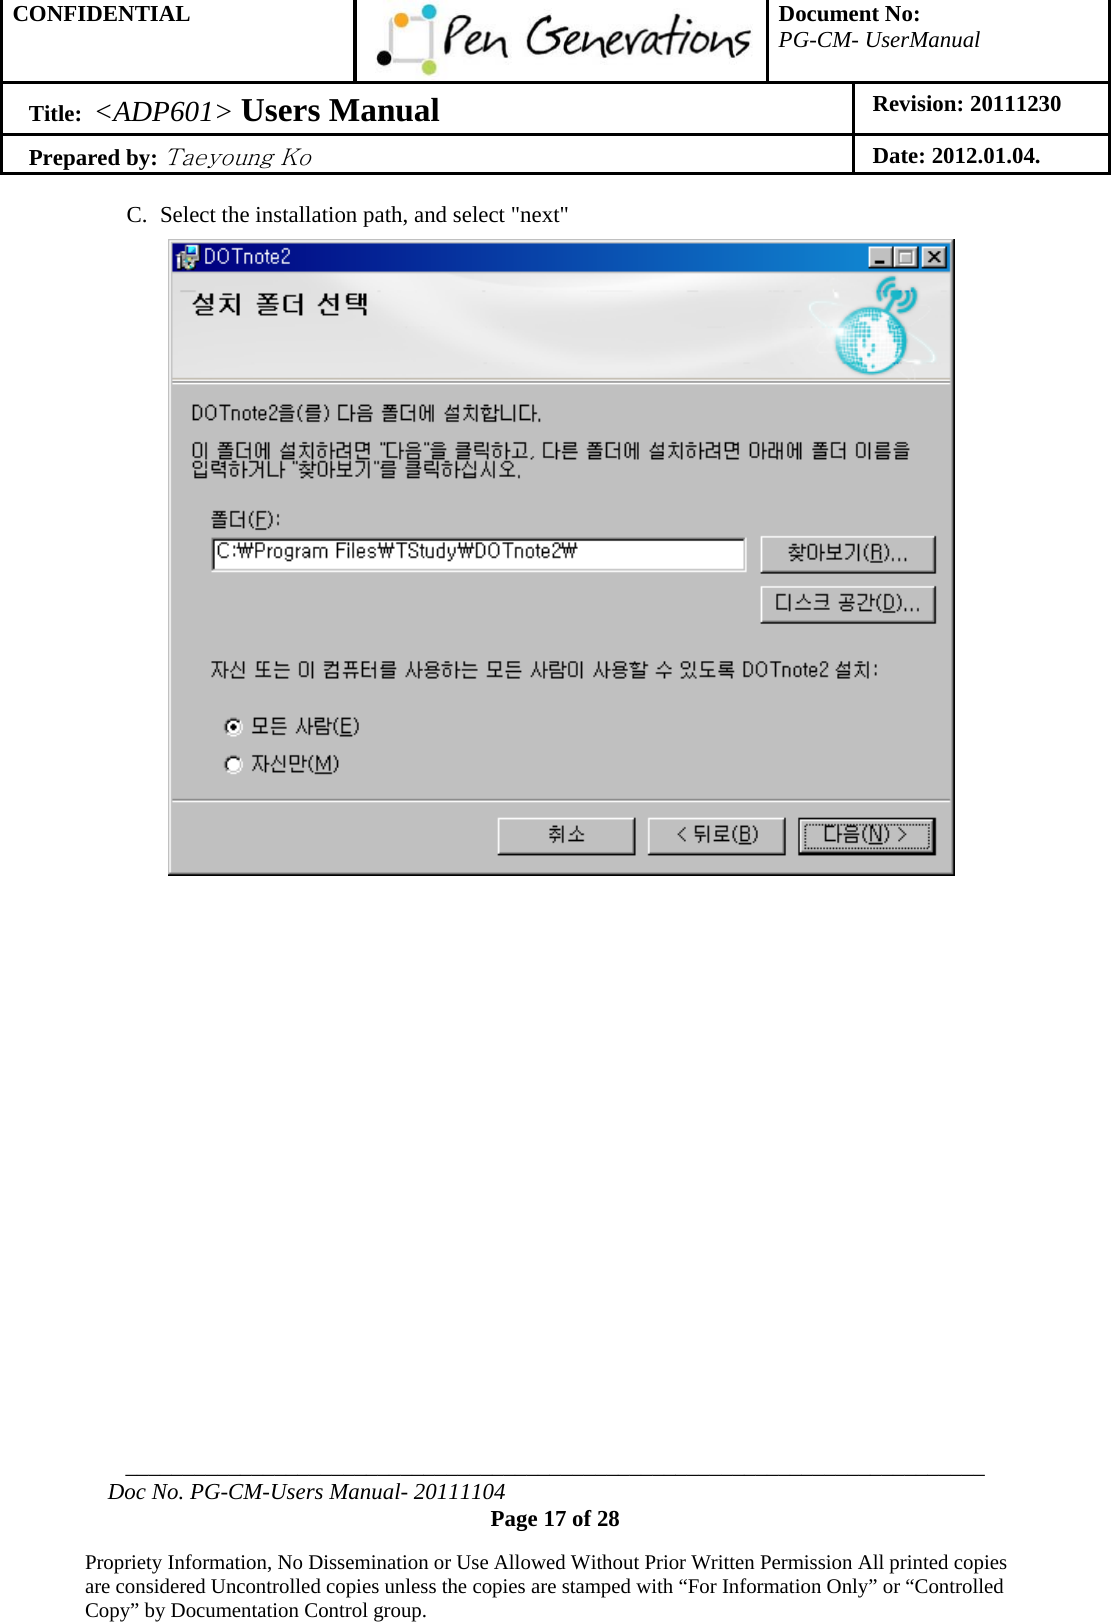 CONFIDENTIAL  Document No: PG-CM- UserManual Title:  &lt;ADP601&gt; Users Manual   Revision: 20111230 Prepared by: Taeyoung Ko Date: 2012.01.04.  ___________________________________________________________________________ Doc No. PG-CM-Users Manual- 20111104 Page 17 of 28  Propriety Information, No Dissemination or Use Allowed Without Prior Written Permission All printed copies are considered Uncontrolled copies unless the copies are stamped with “For Information Only” or “Controlled Copy” by Documentation Control group.  C. Select the installation path, and select &quot;next&quot;                